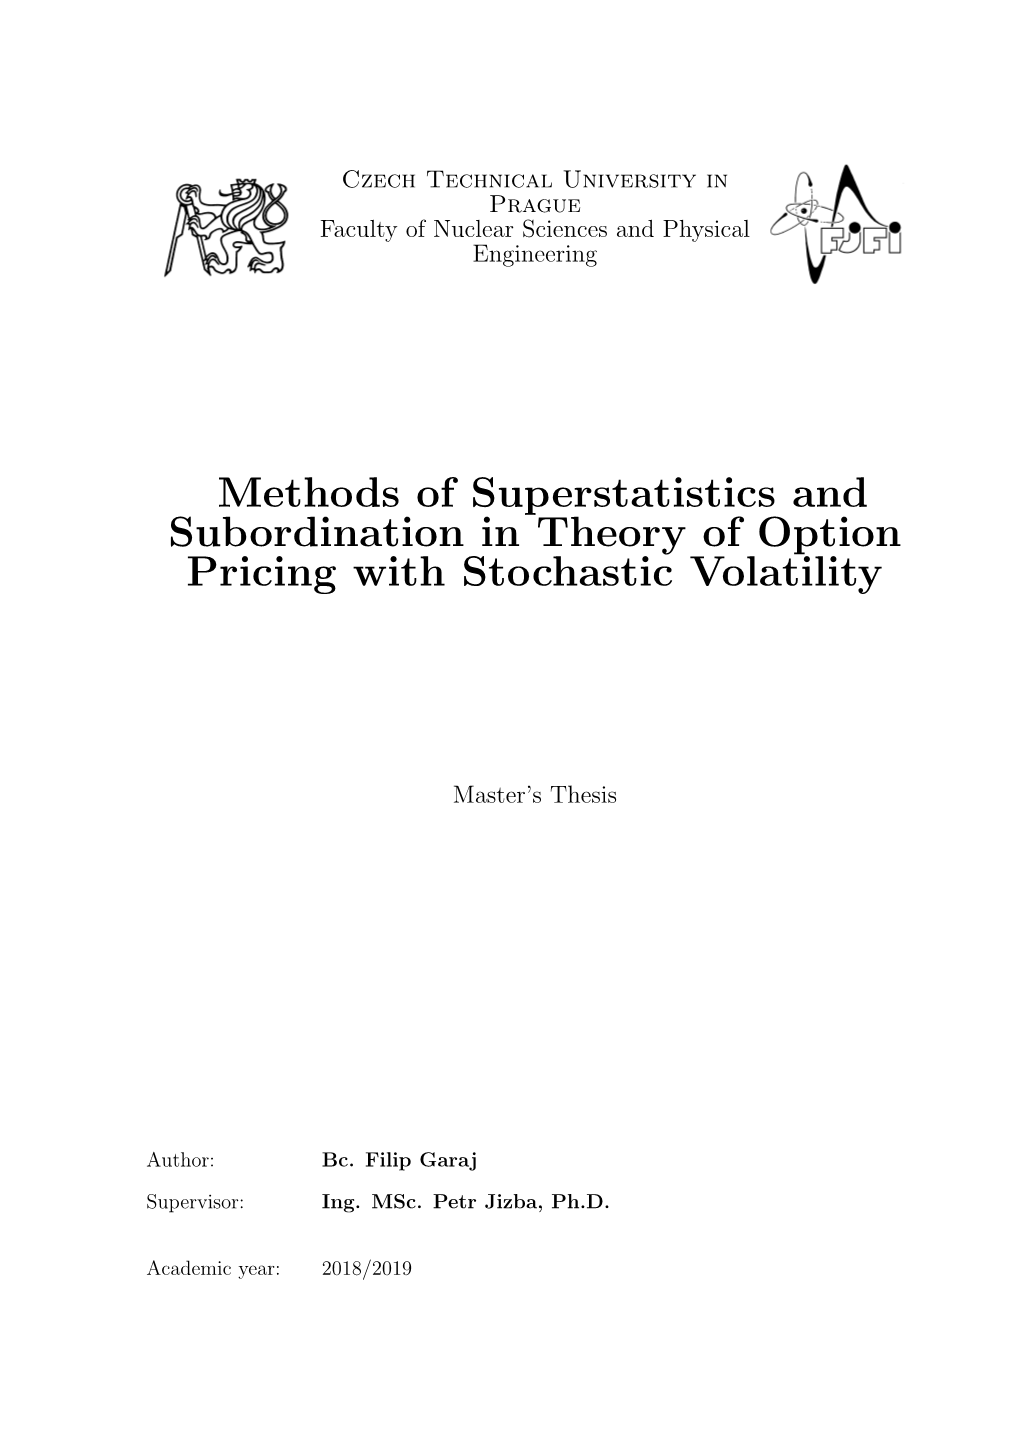 Methods of Superstatistics and Subordination in Theory of Option Pricing with Stochastic Volatility